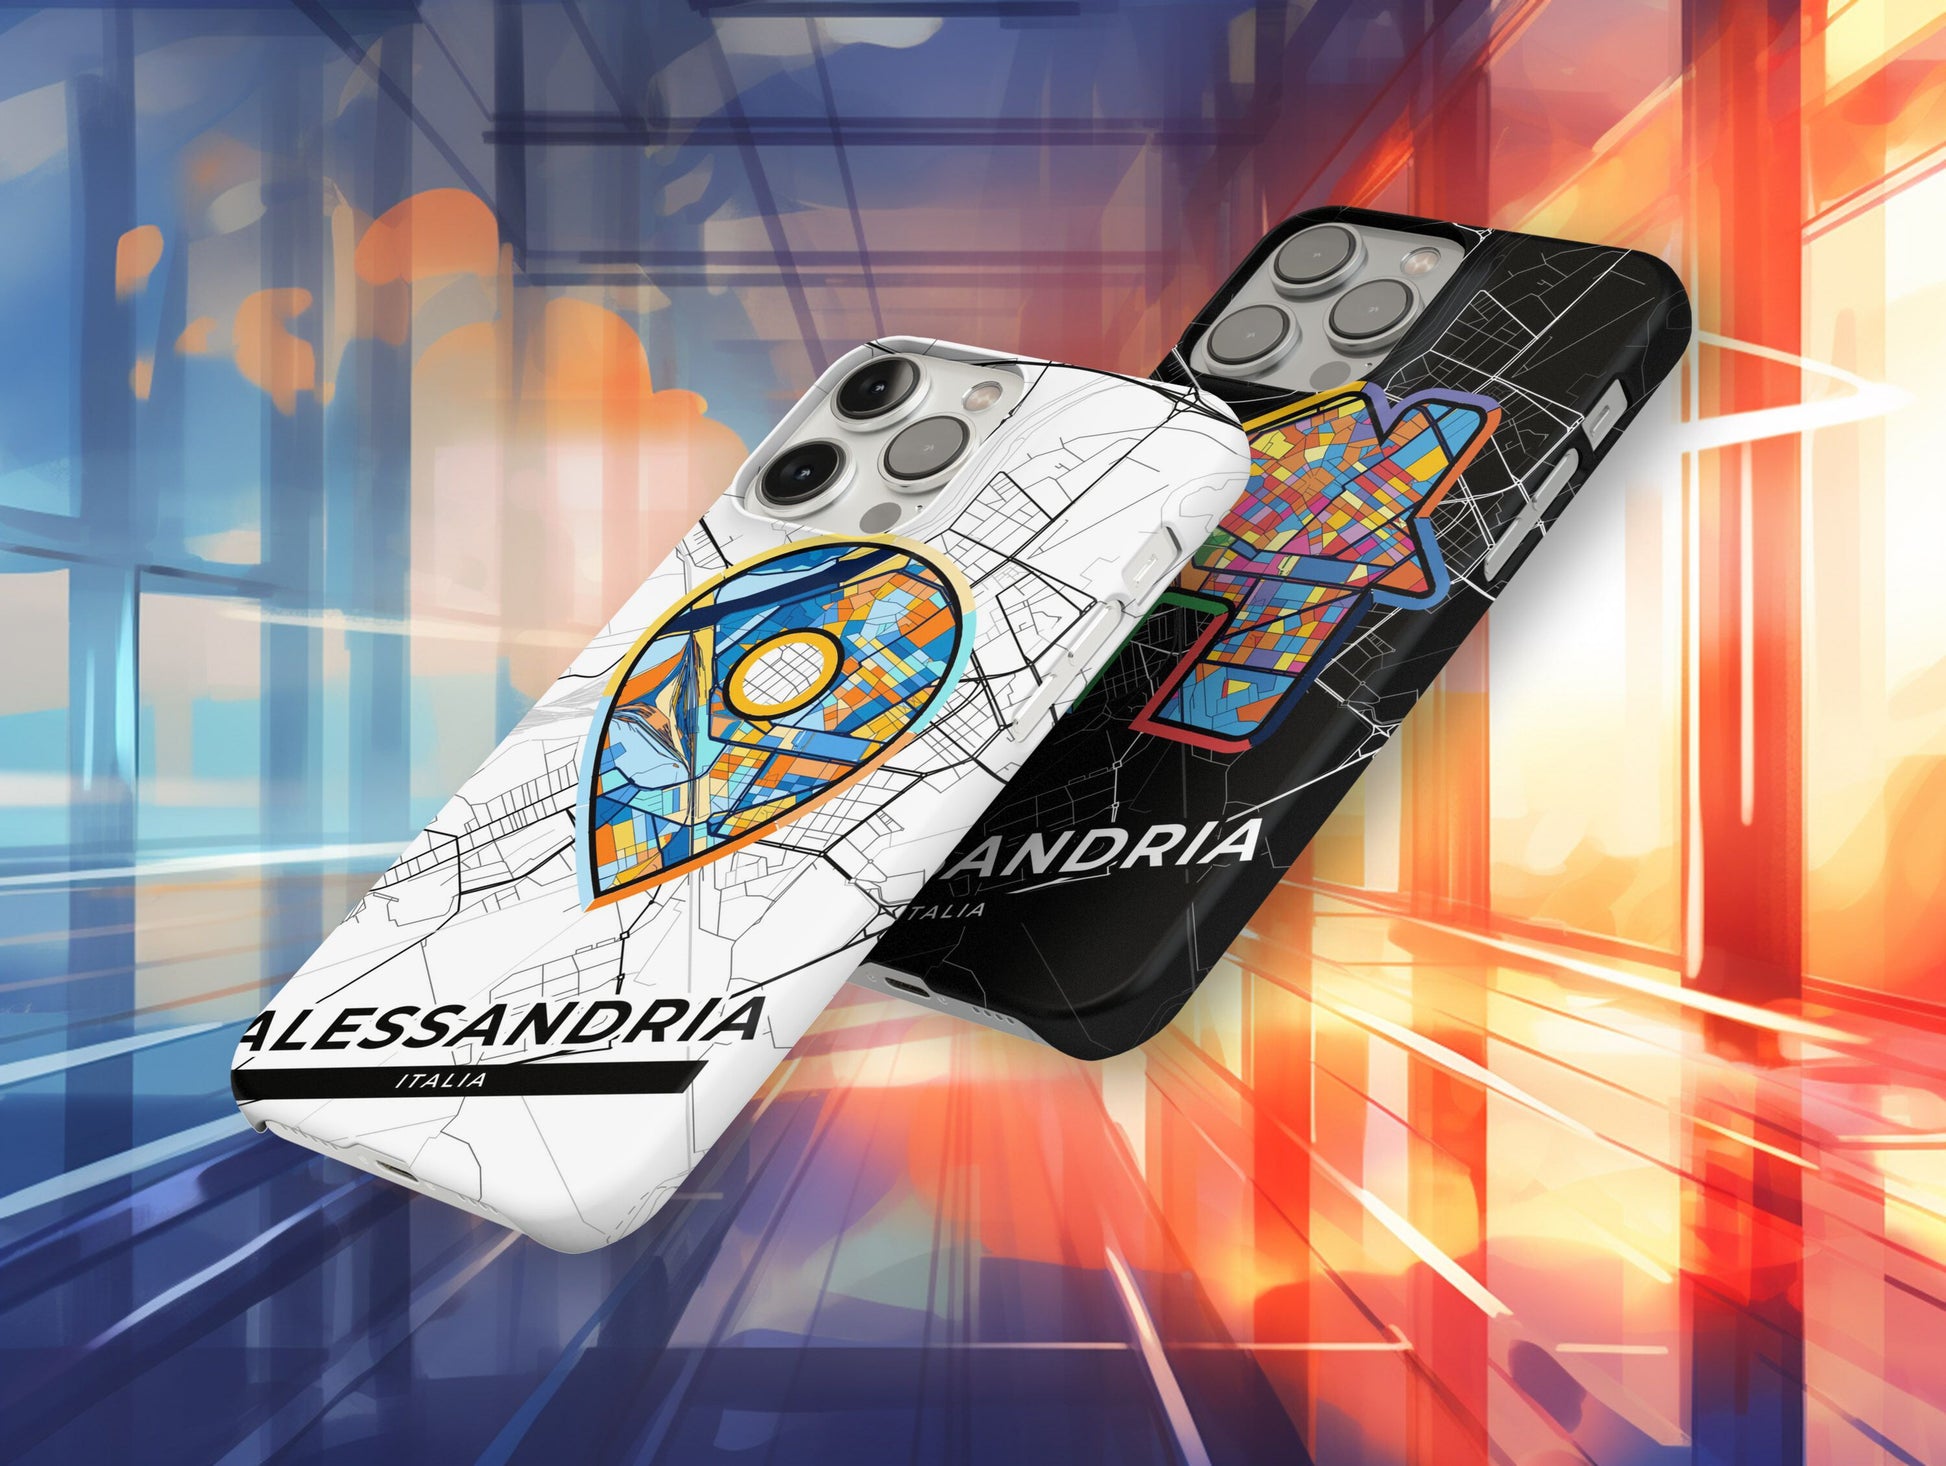 Alessandria Italy slim phone case with colorful icon. Birthday, wedding or housewarming gift. Couple match cases.